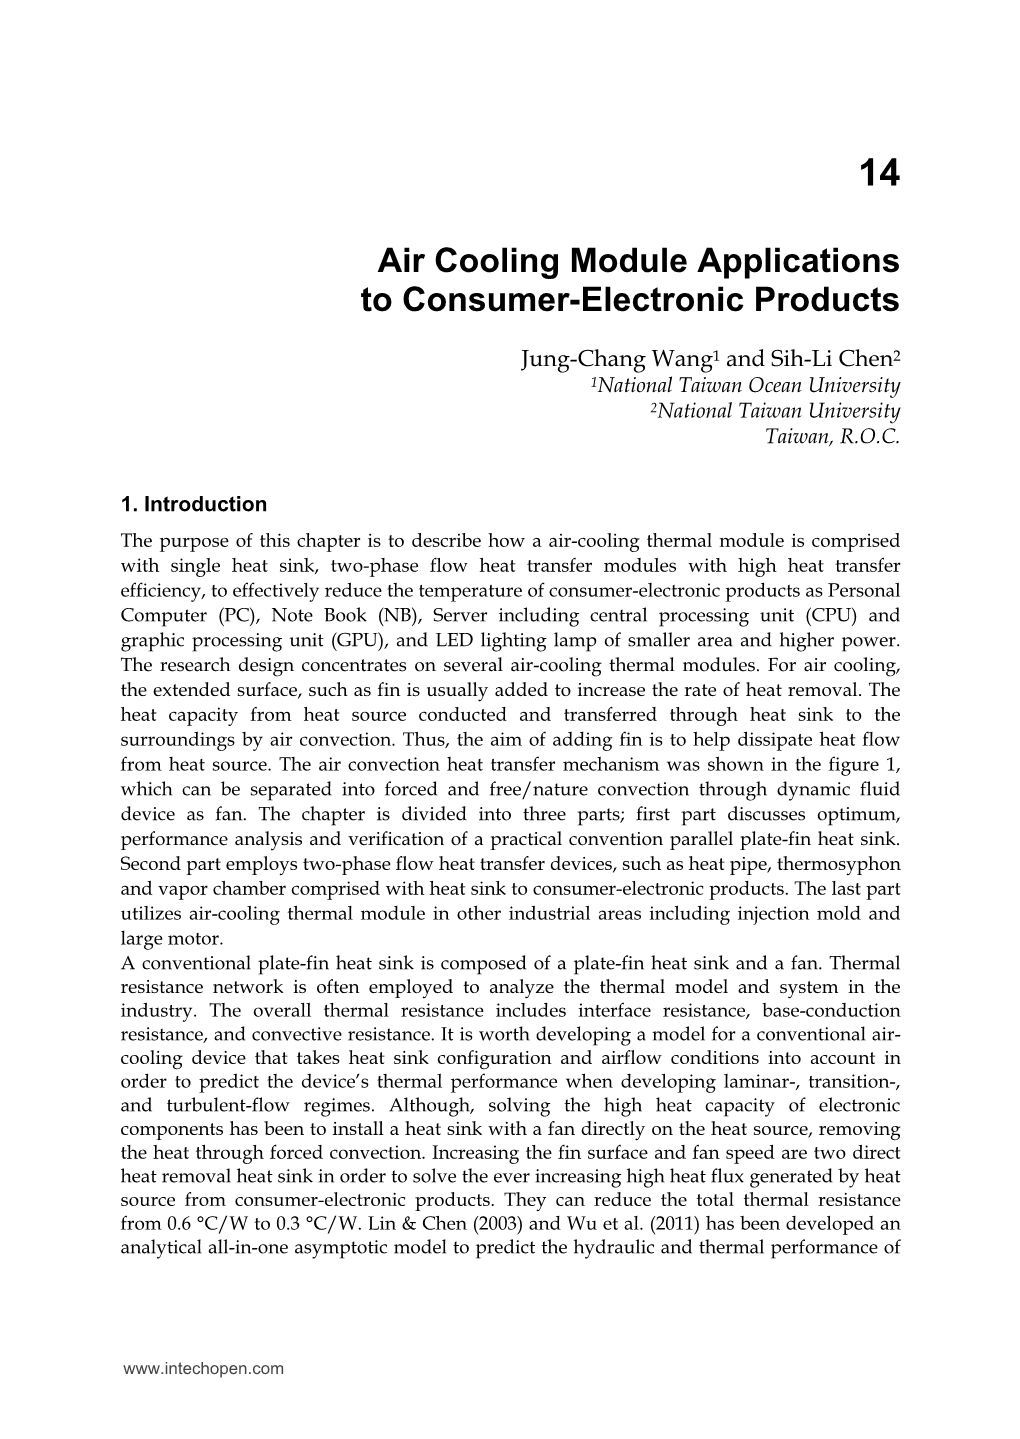 Air Cooling Module Applications to Consumer-Electronic Products